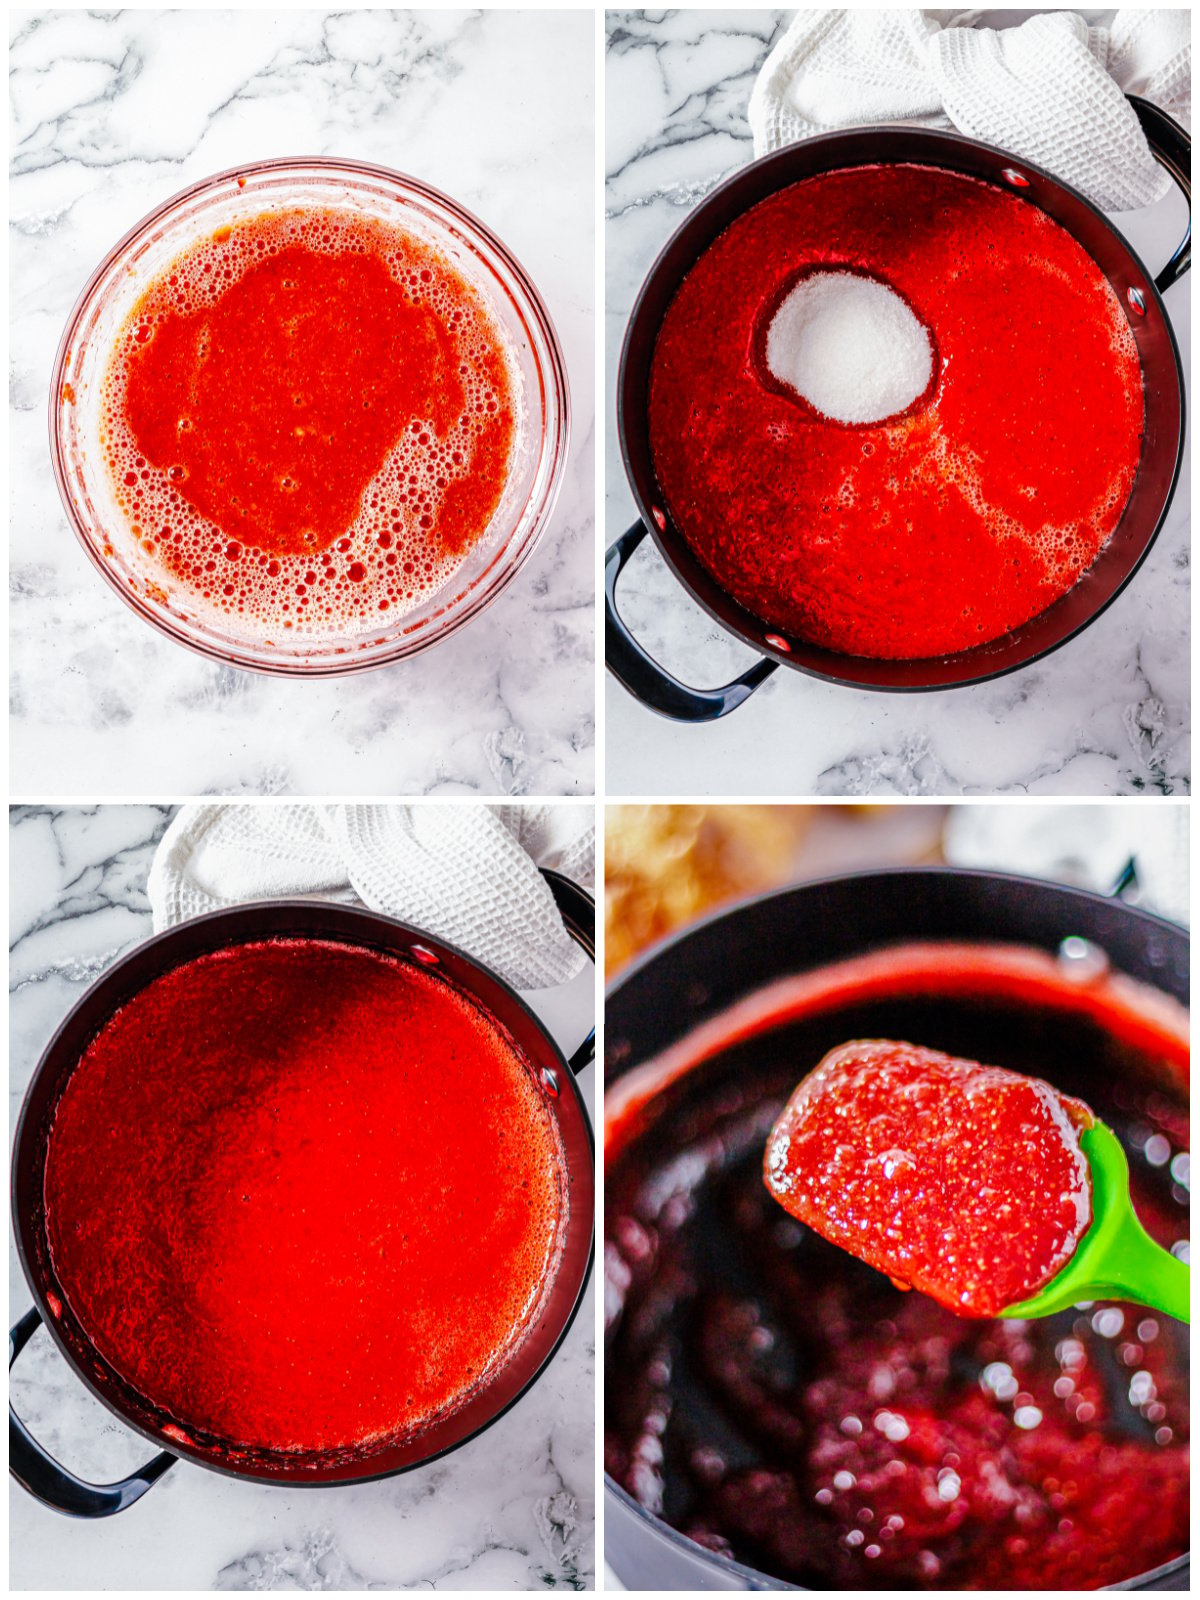 Step by step photos on how to make Strawberry Butter.